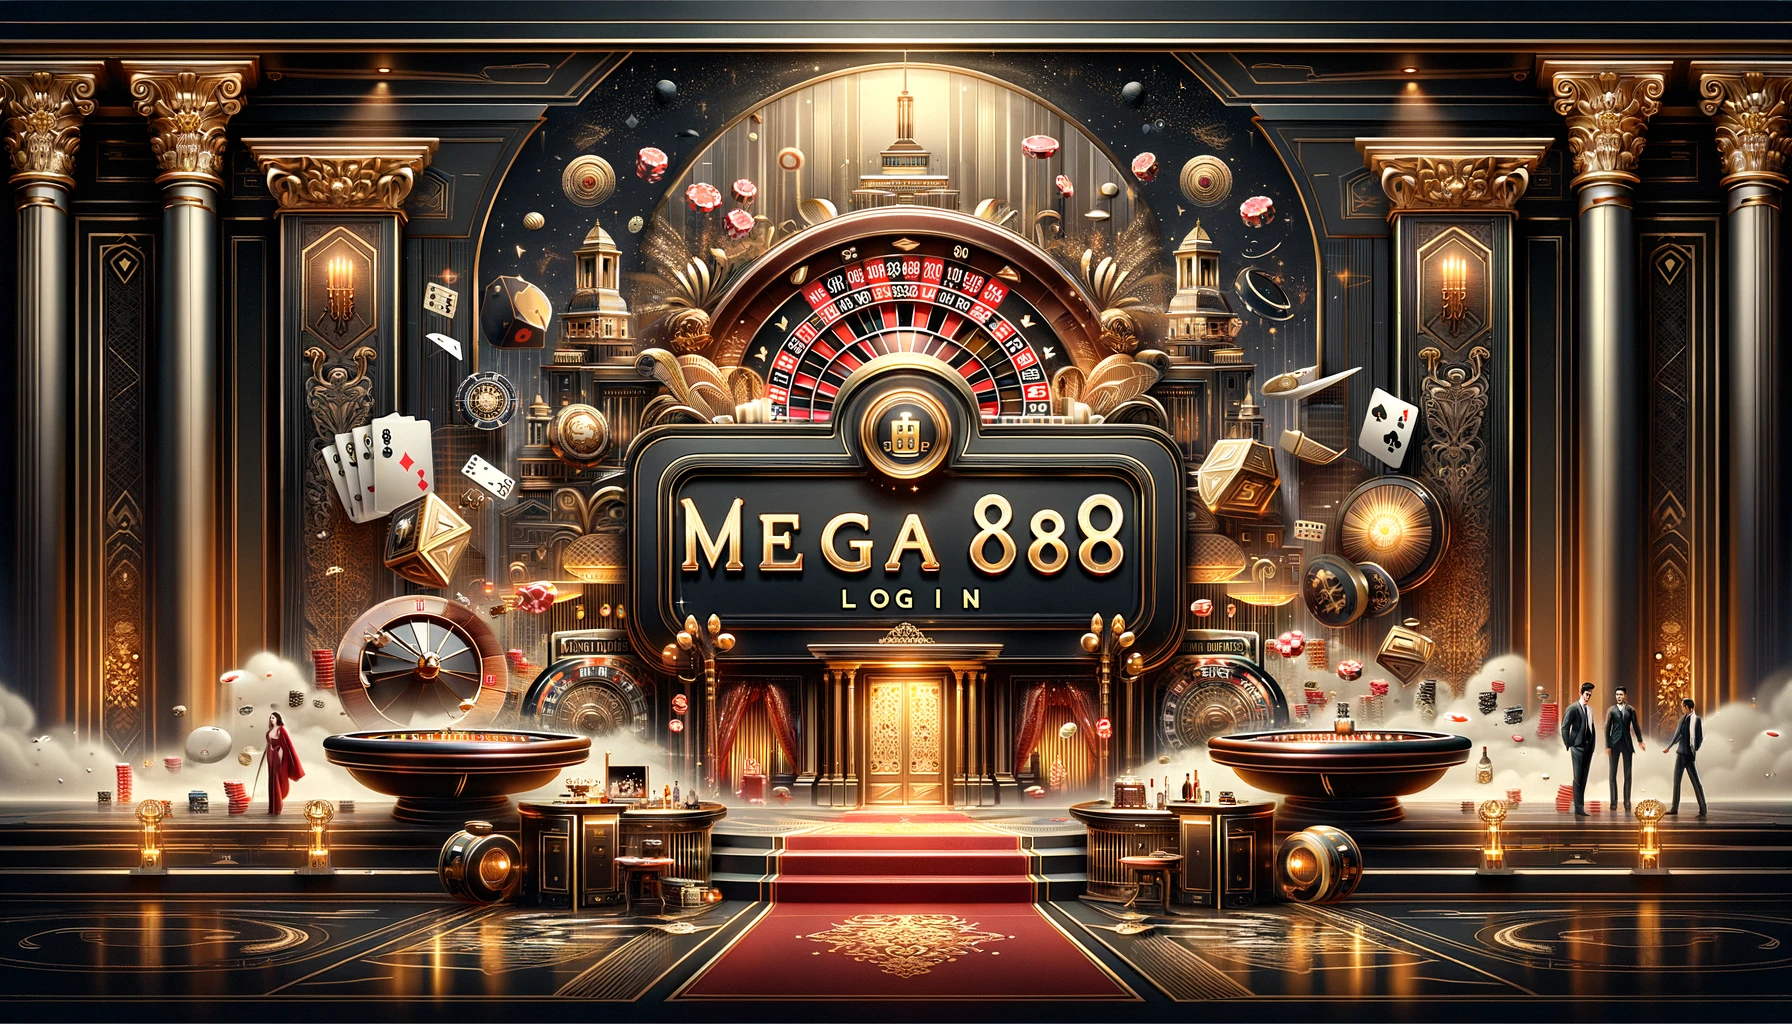 Mega888 Casino Login: Unlock the Gaming Experience with Hlbet